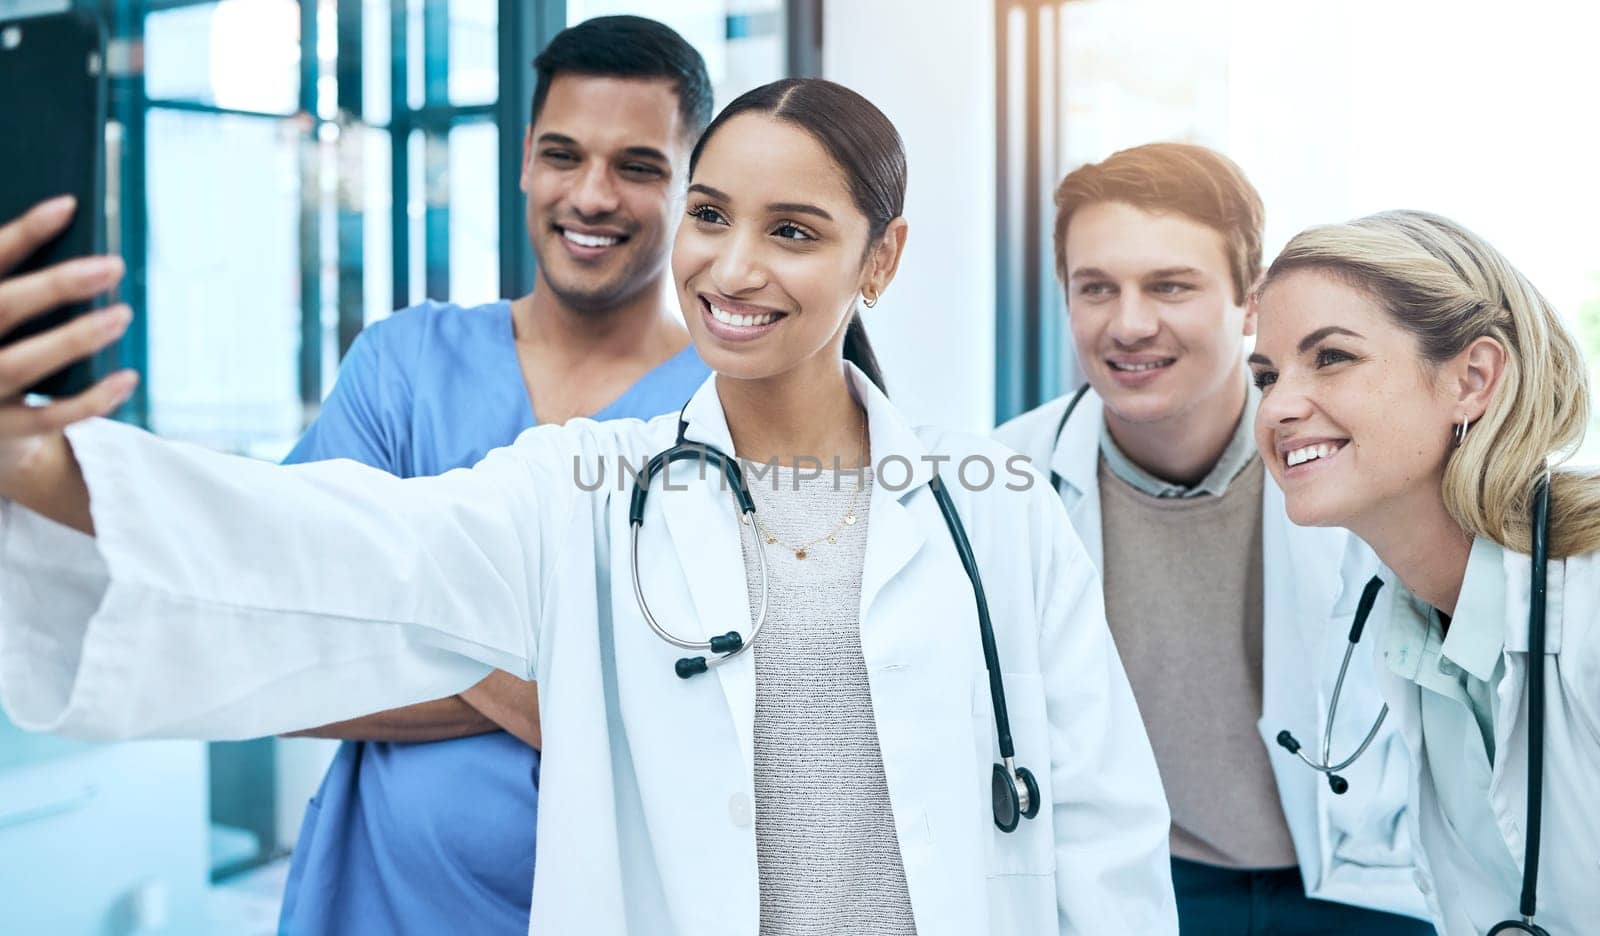 Selfie of nurses, doctors or medical group of people for social media, hospital or healthcare teamwork post. Happy, diversity and young women and men with internship profile picture or career memory.